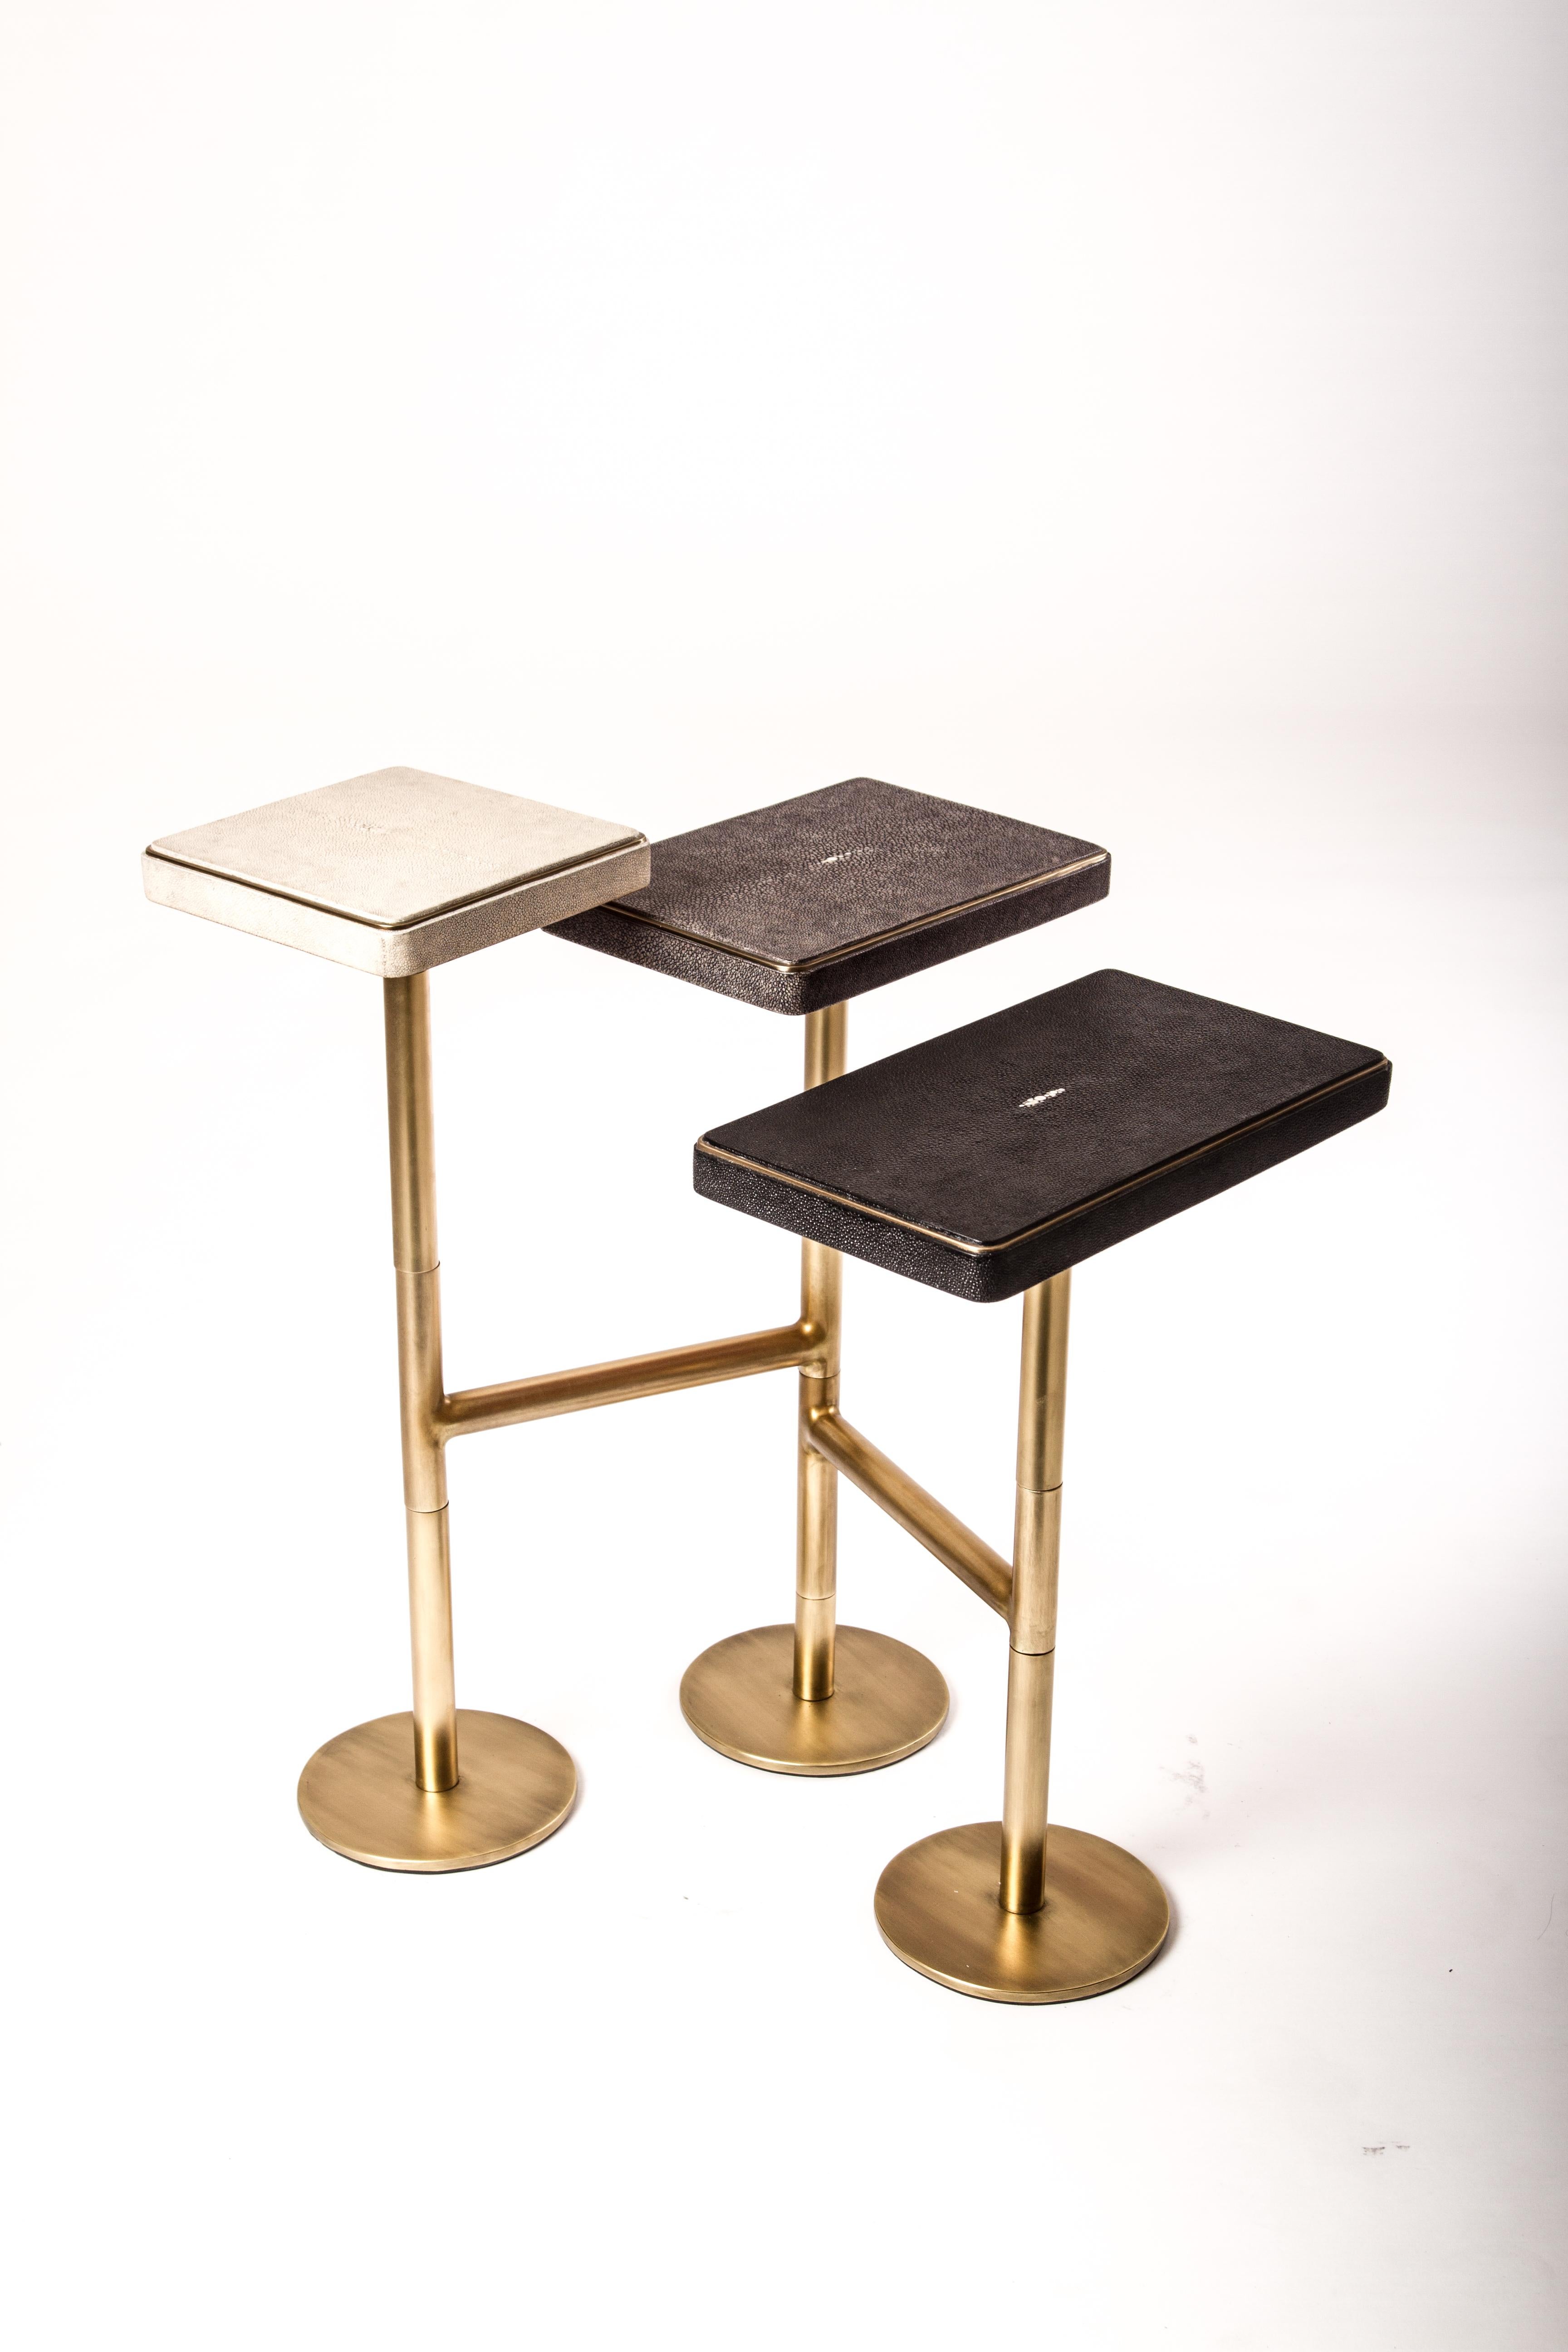 The 3-top rotating side table in cream shagreen, grey-blue shagreen and coal black shagreen is completely mobile, allowing one to adjust the piece to their preference from elongated to clustered. The shagreen inlaid tops have a discreet metal border